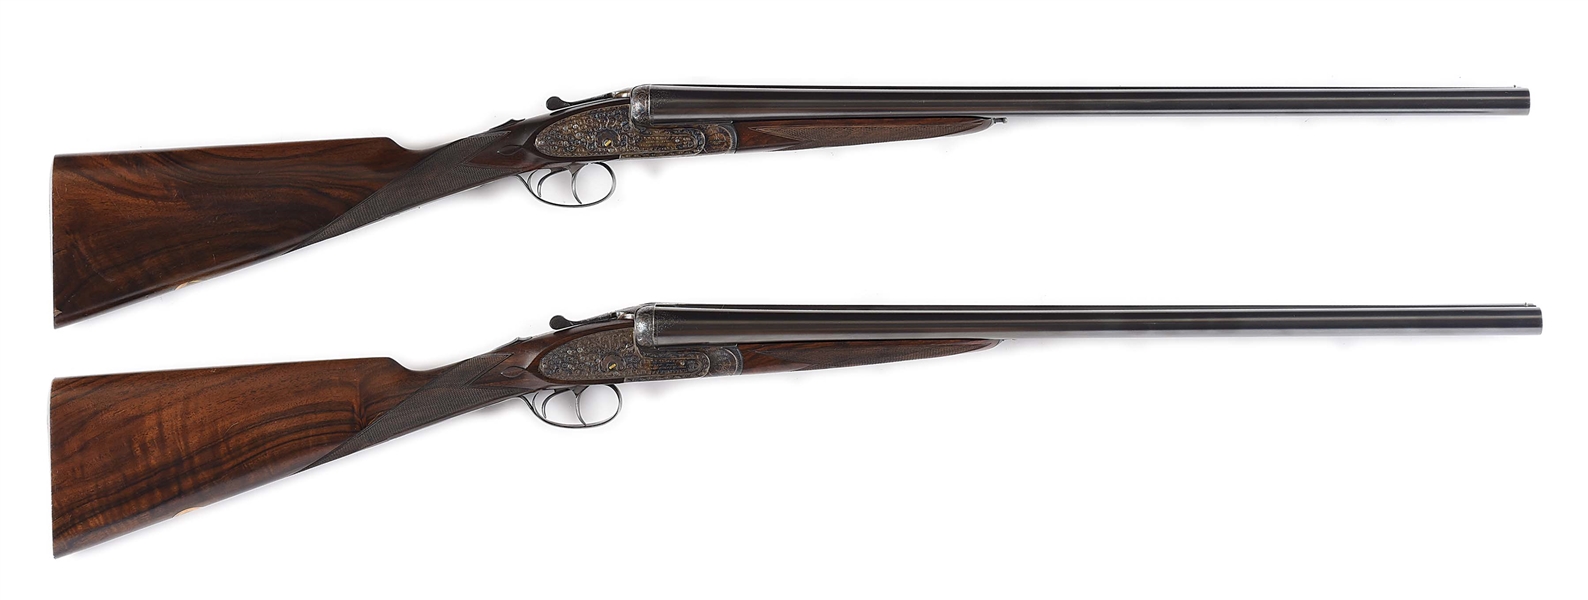 (M) PAIR OF PEDRO ARRIZABALAGA XXV ENGLISH SCROLL SIDELOCK EJECTOR SHOTGUNS MADE FOR J. ROBERTS OF LONDON WITH CASE.